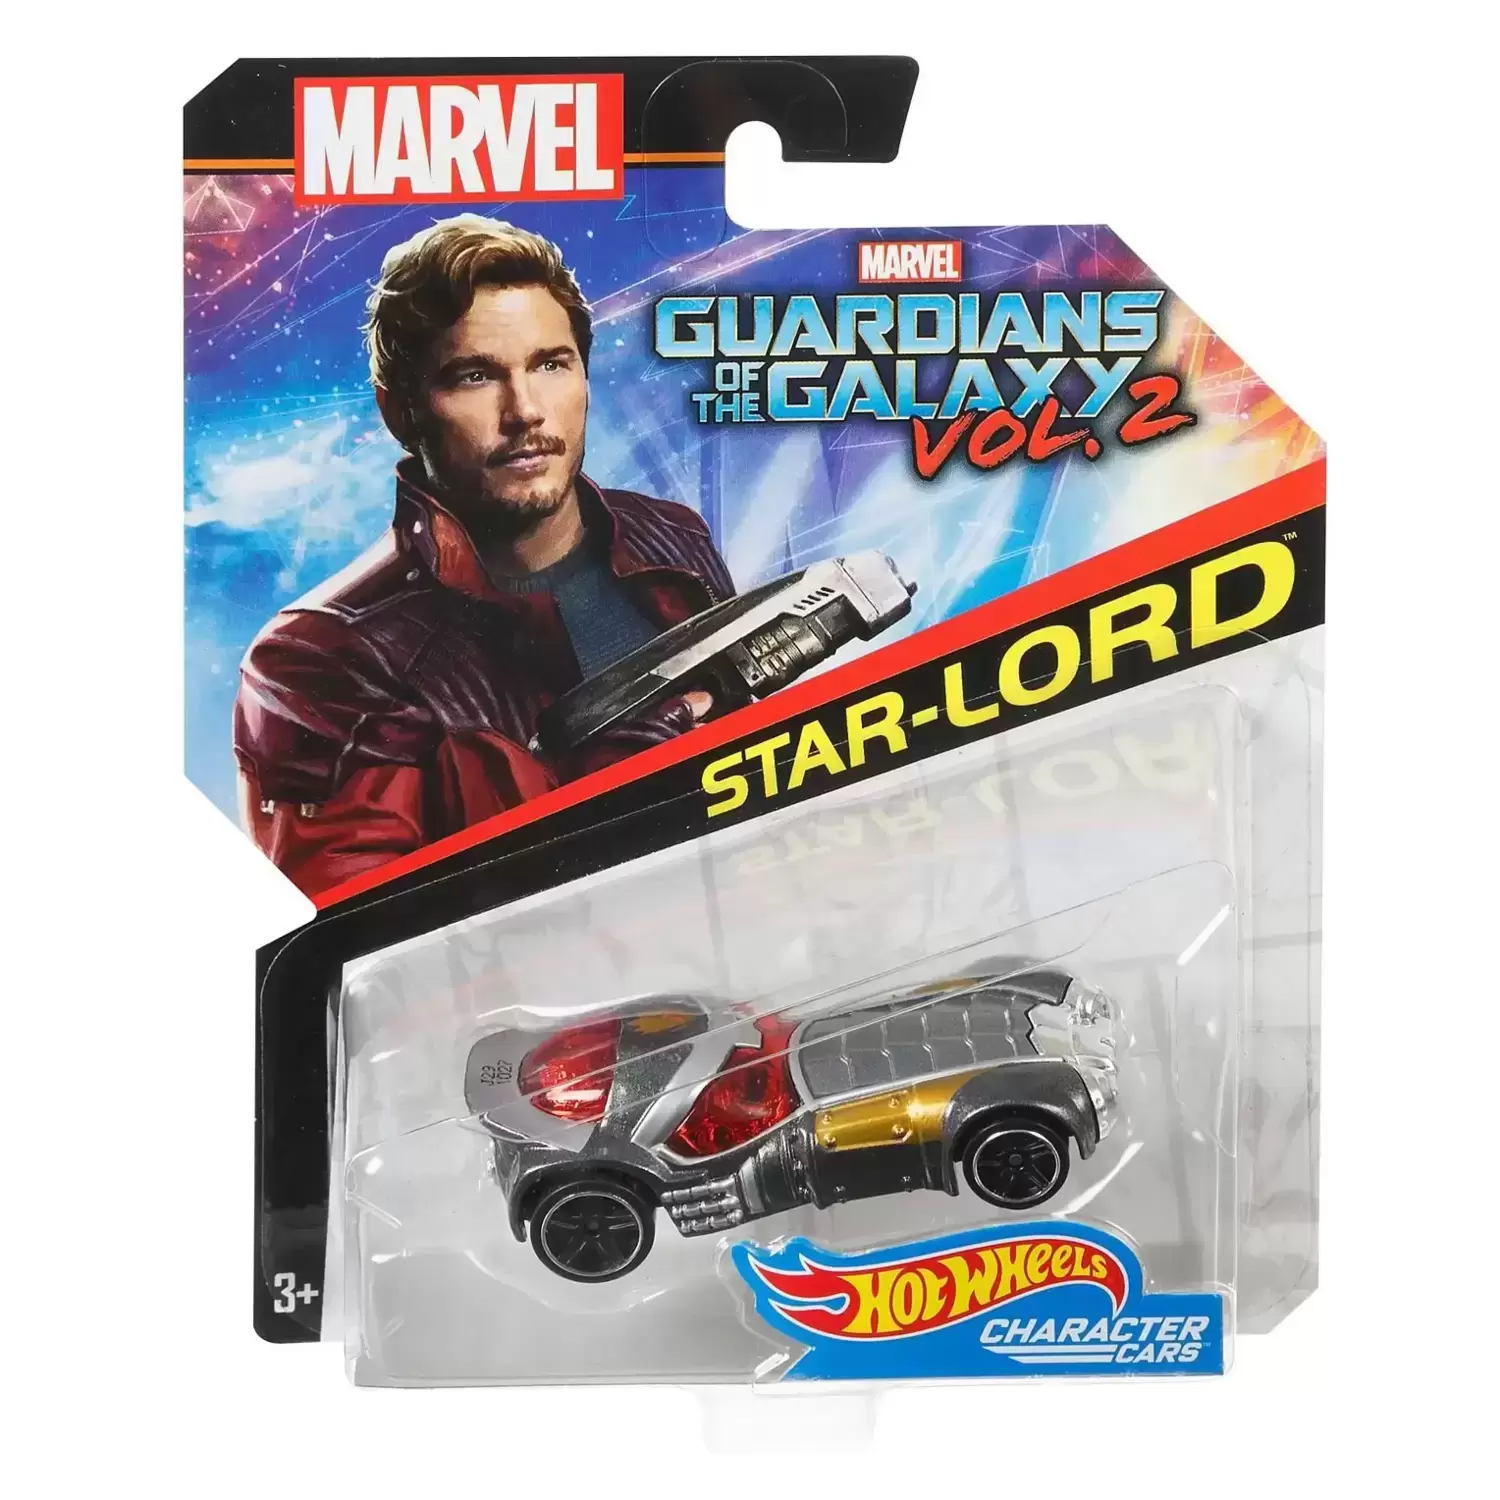 Marvel Character Cars - Guardians of the Galaxy Vol. 2 - Star Lord